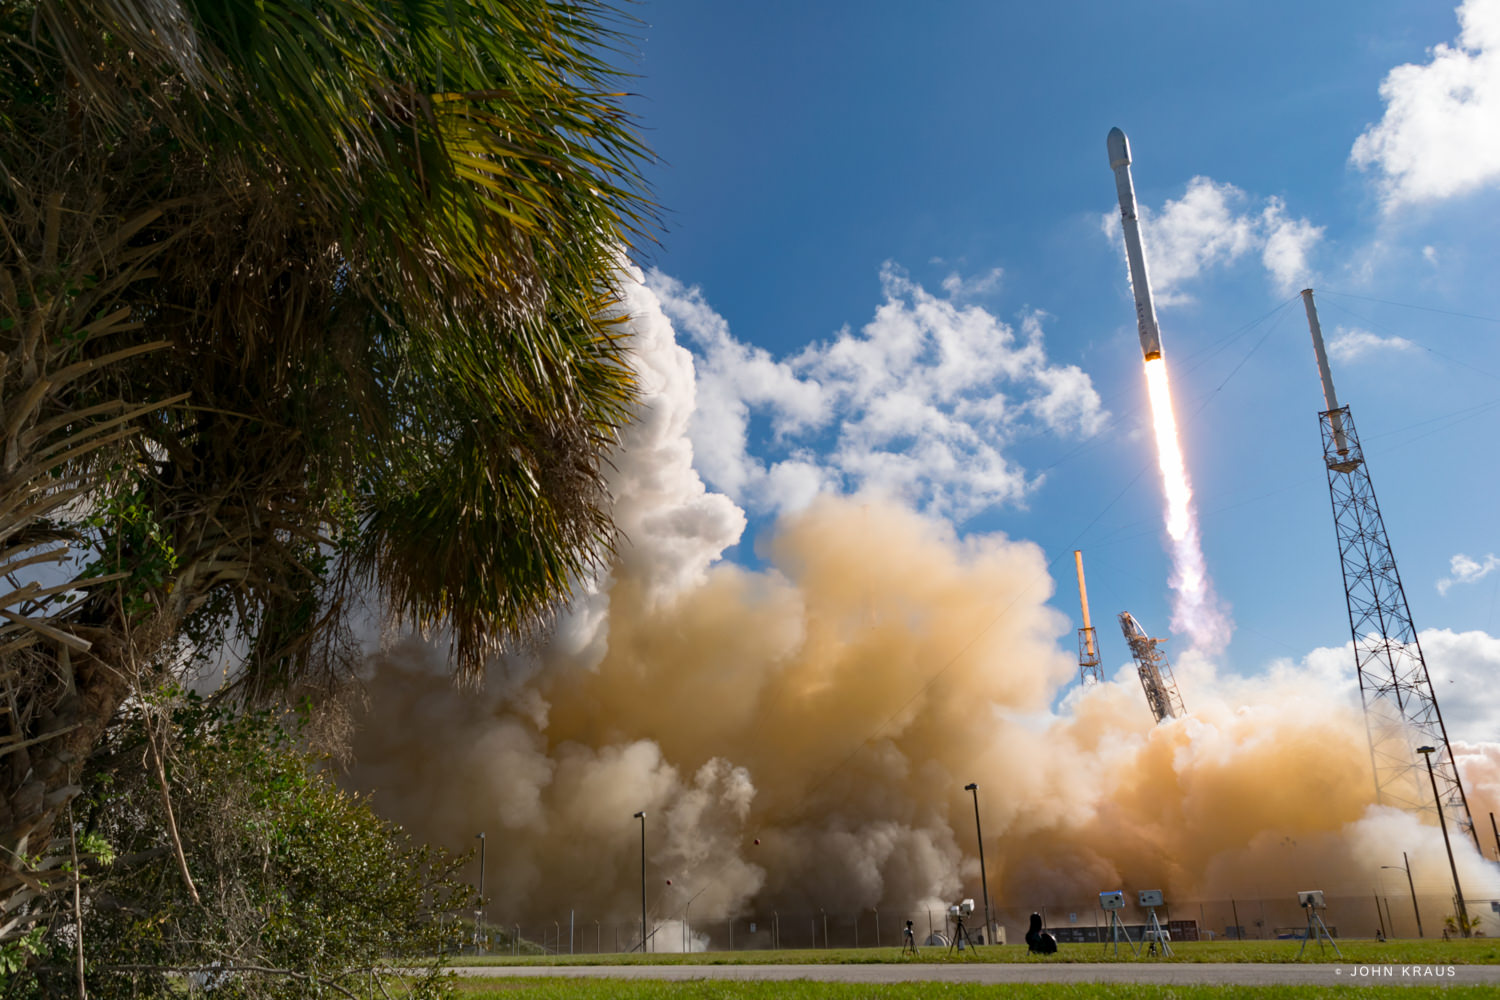 Liftoff of SpaceX Falcon 9 with Thaicom-8 on May 27, 2016 from Space Launch Complex 40 at Cape Canaveral Air Force Station, Fl.  Credit: John Kraus